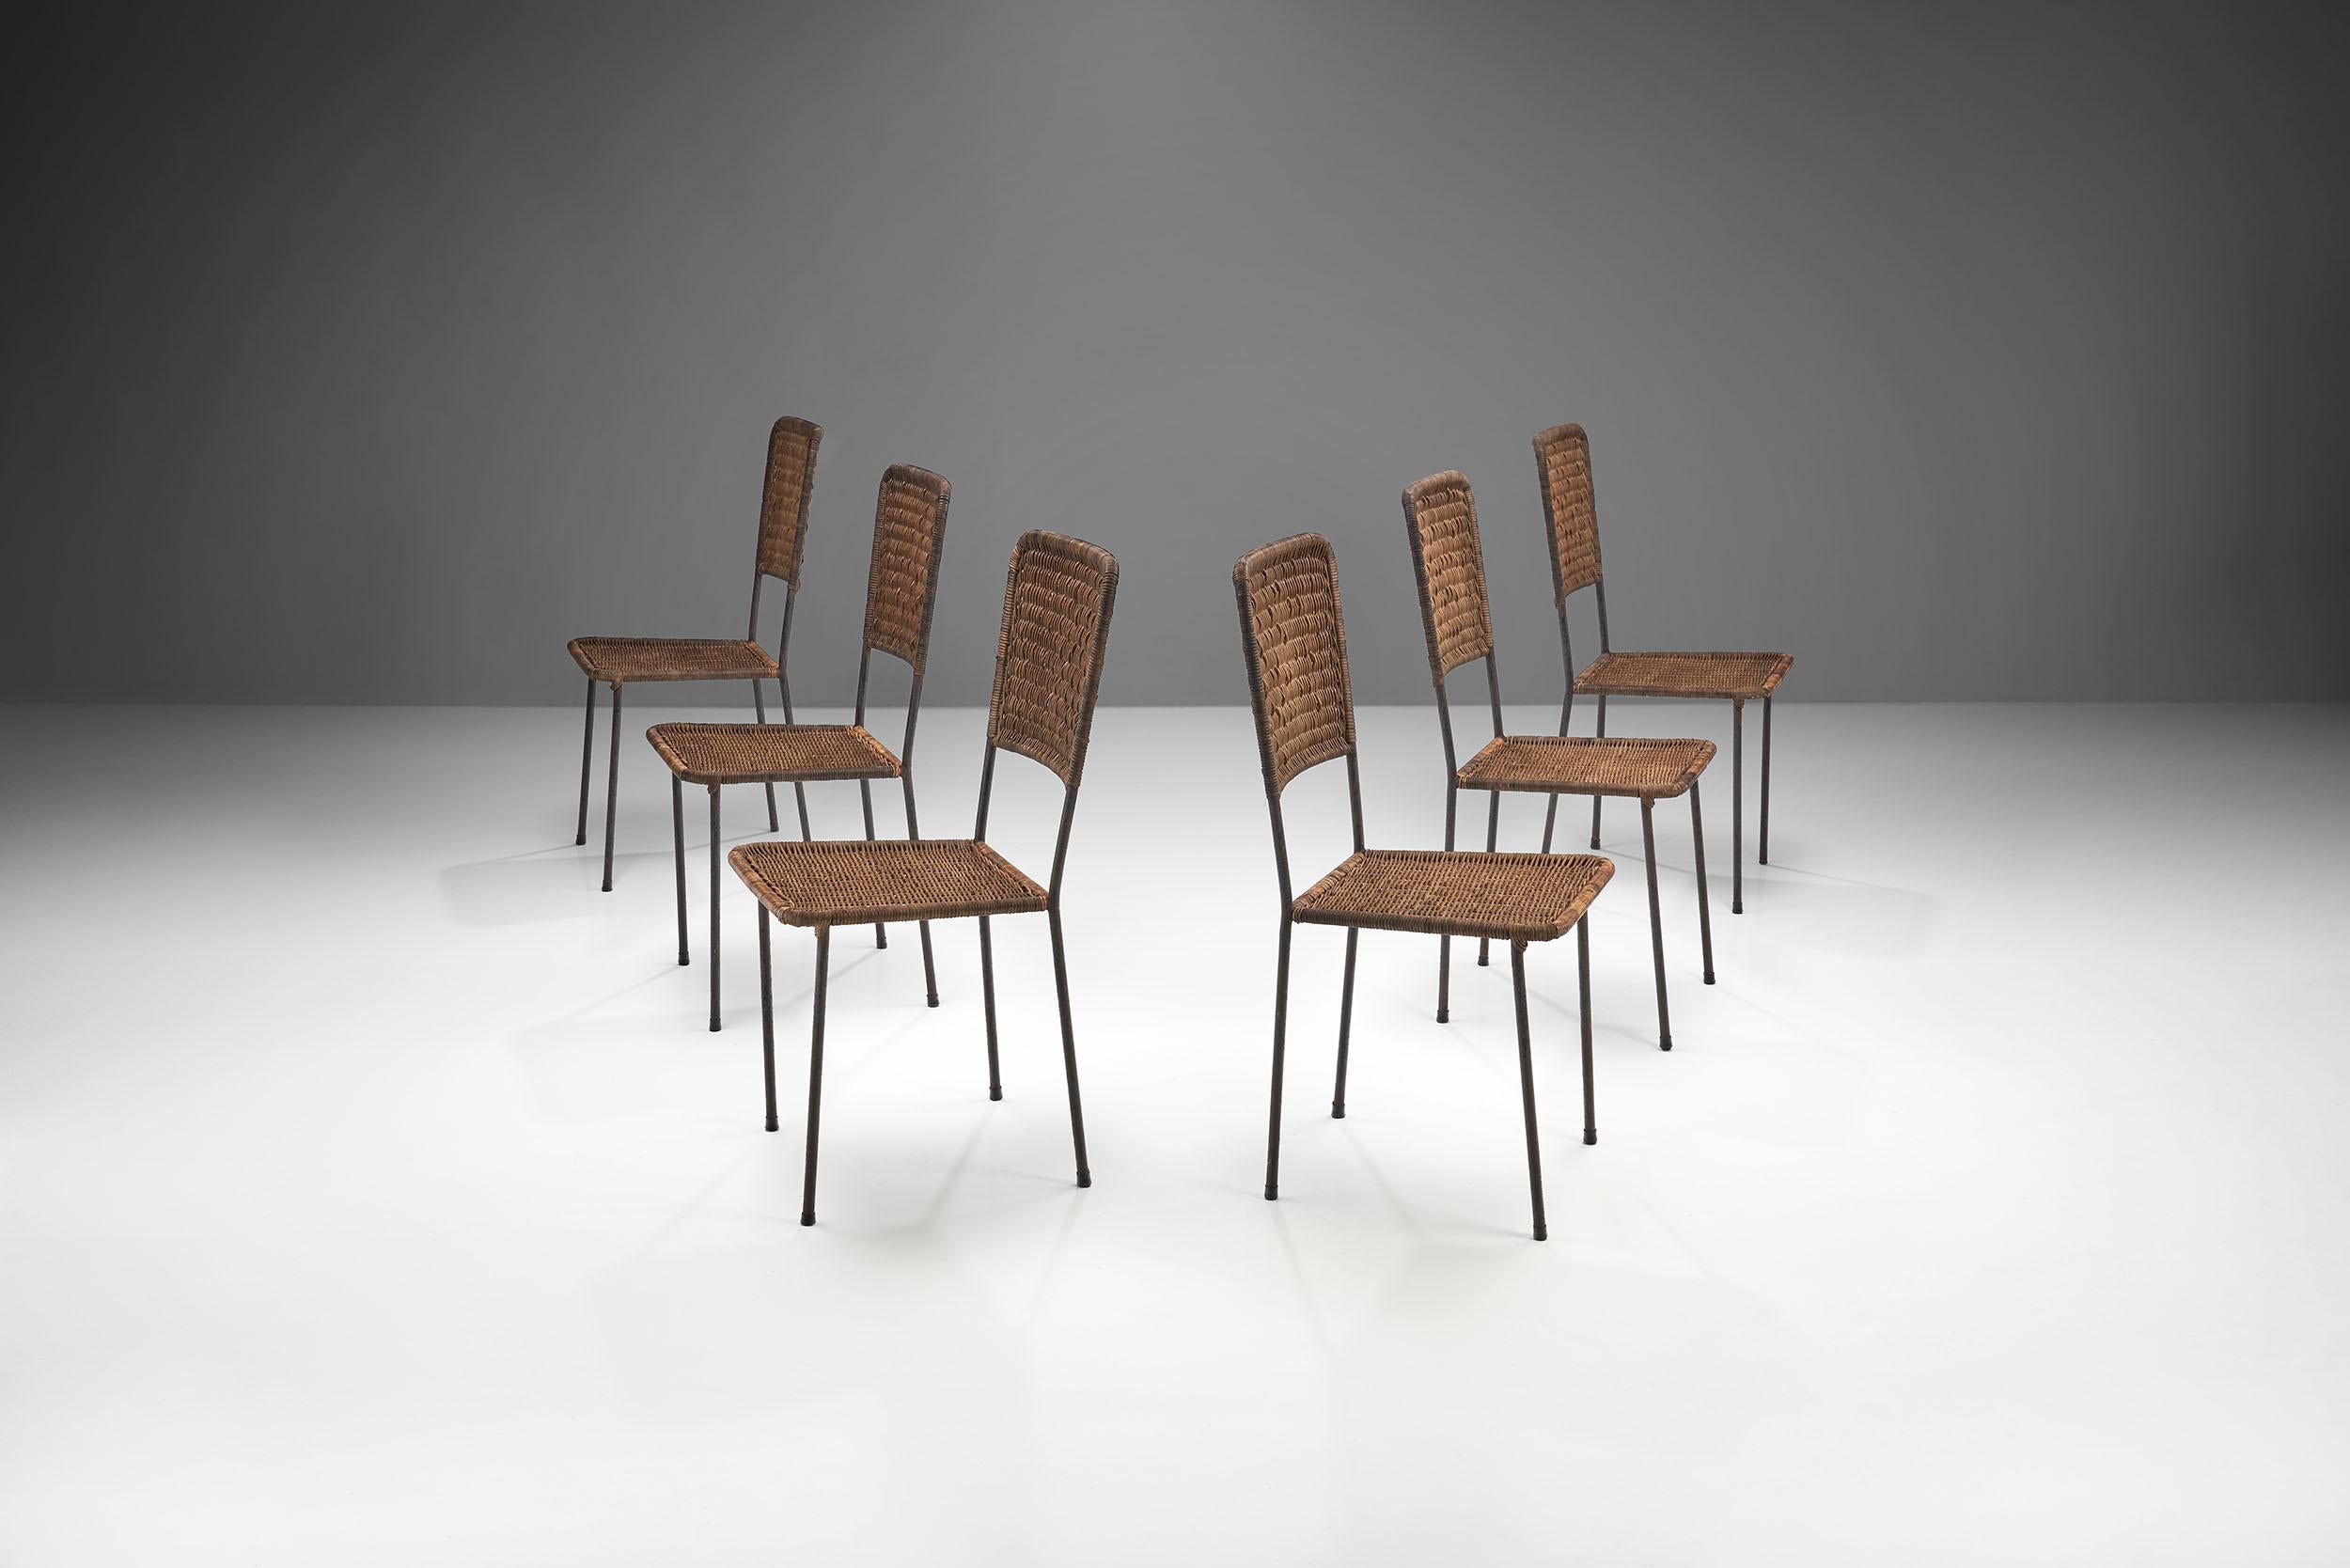 These six Brazilian chairs in iron and rattan, that resemble the work of designers Hauner and Eisler, have a modest and very modernist design that is as elemental as they come. The clear and open frame is balanced geometrically with the solid